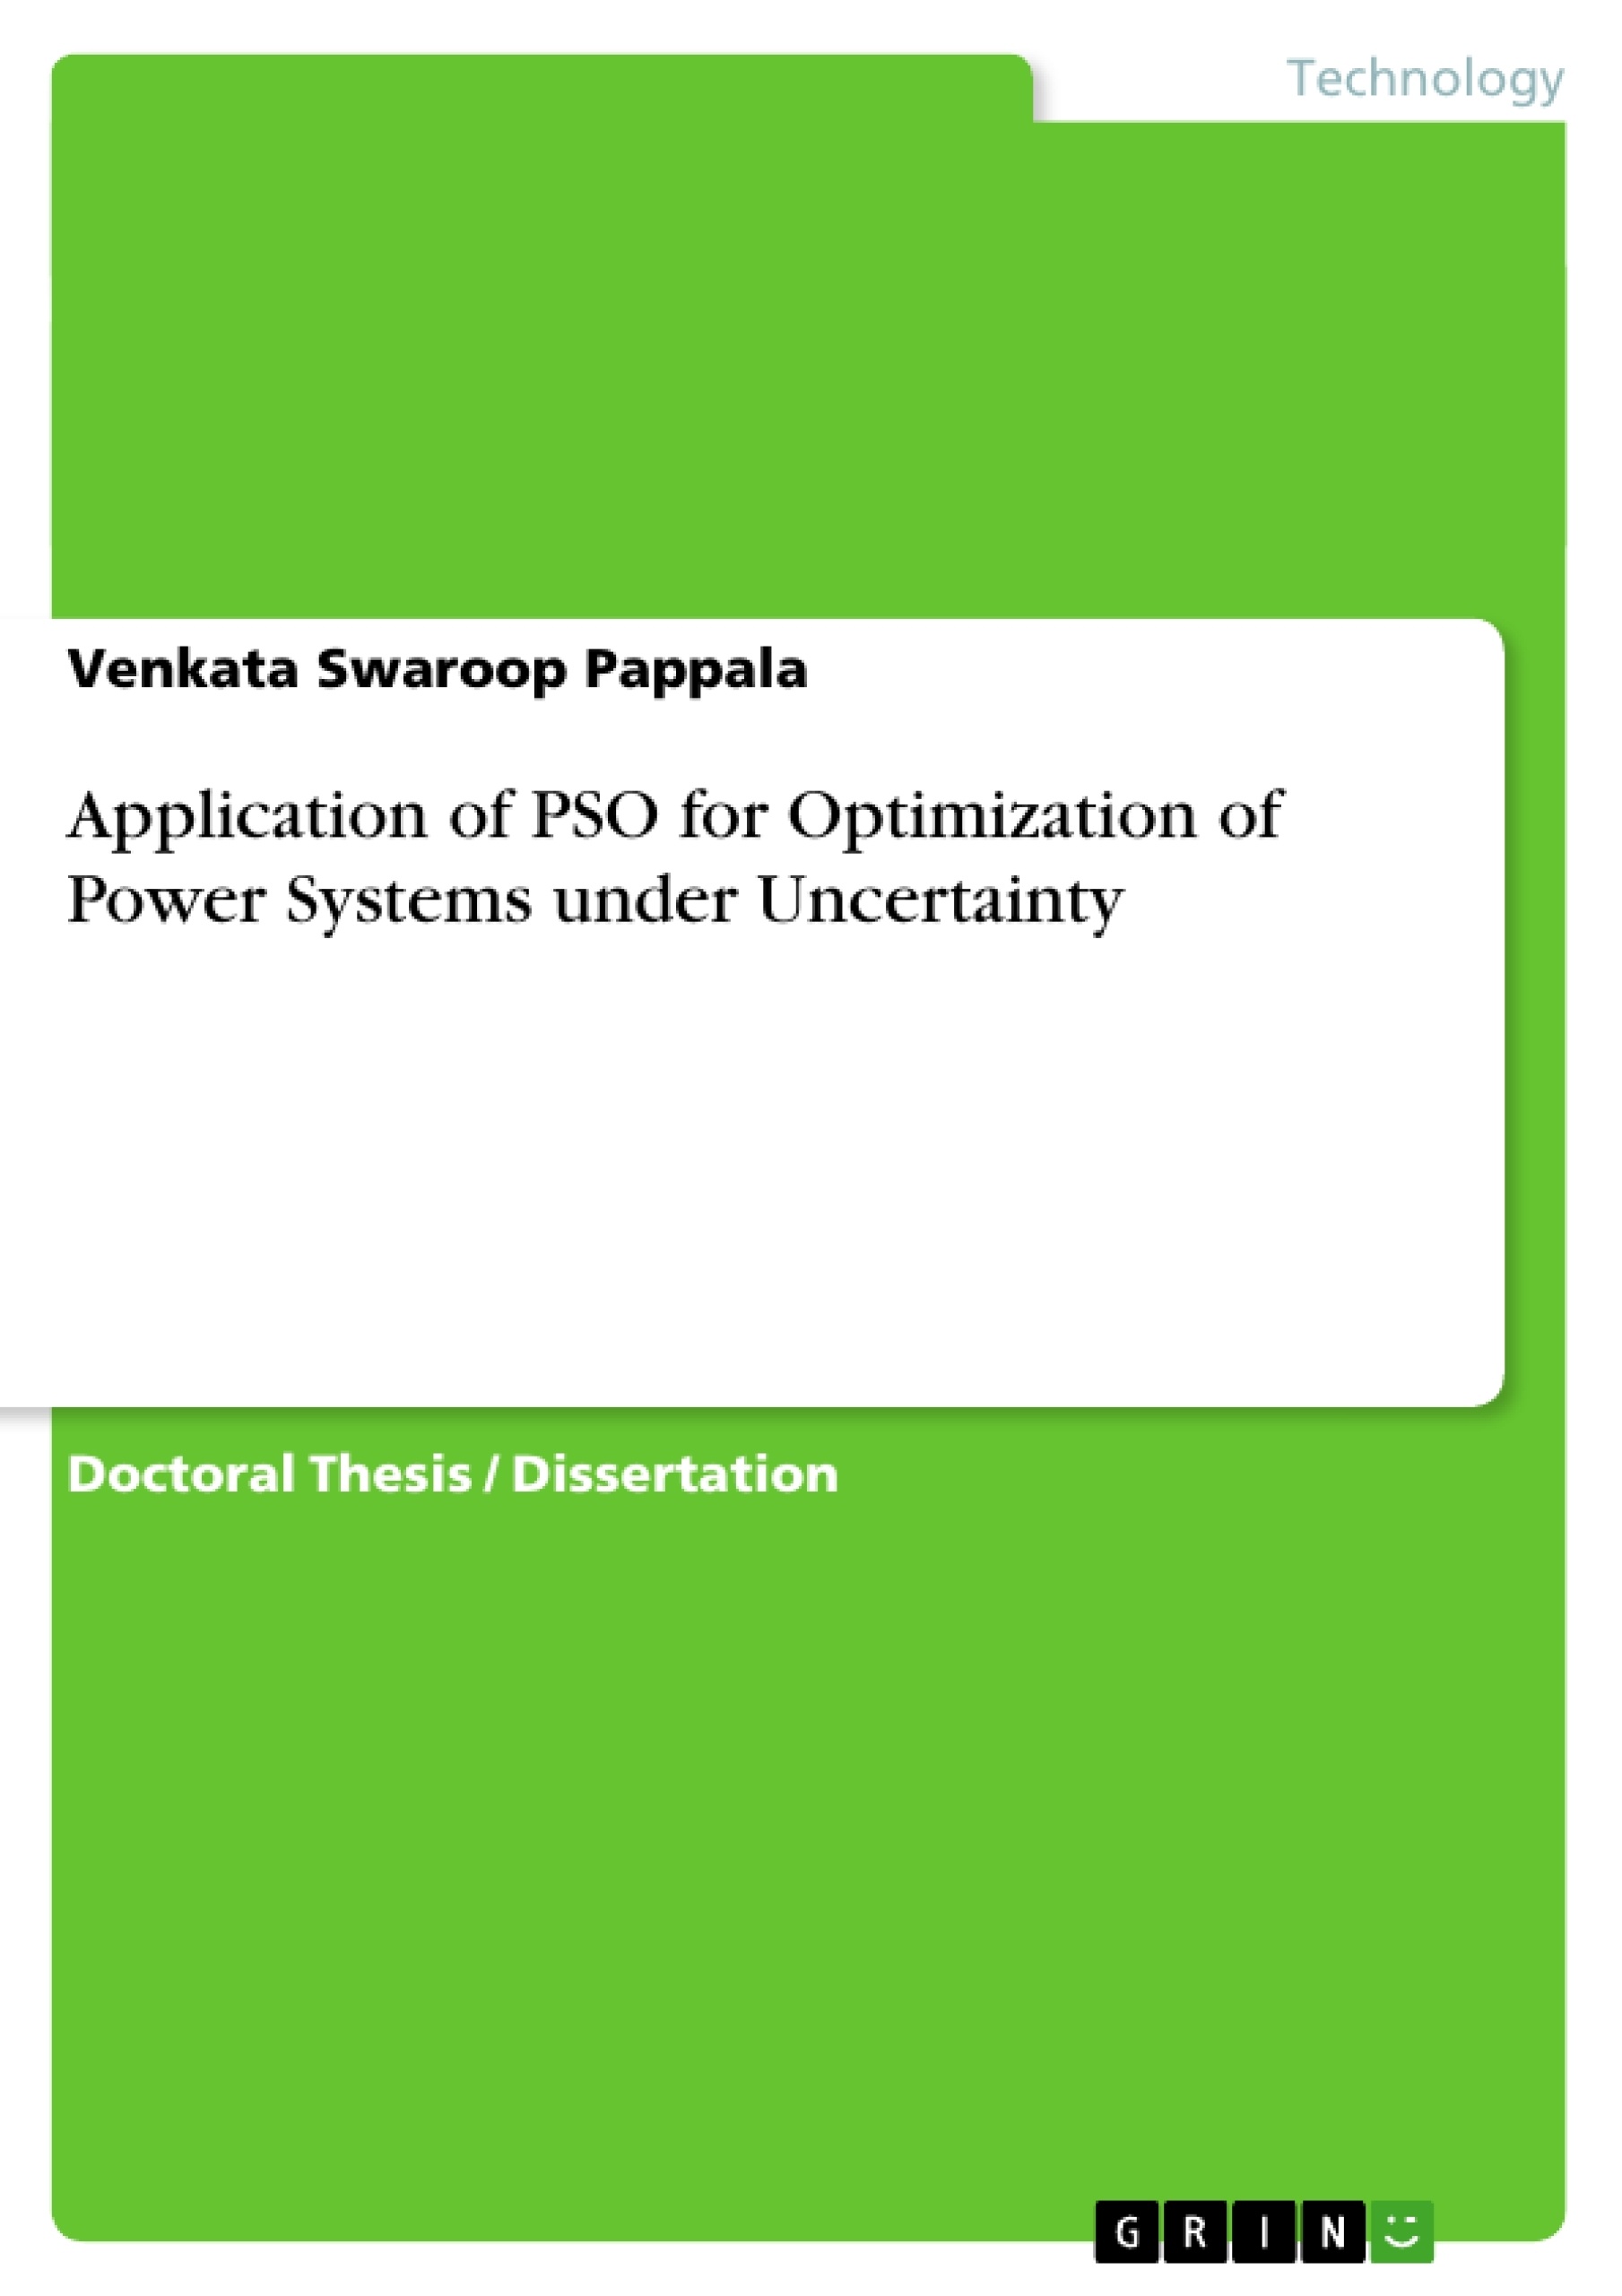 Application　for　Power　Optimization　Uncertainty　under　of　Systems　PSO　of　GRIN